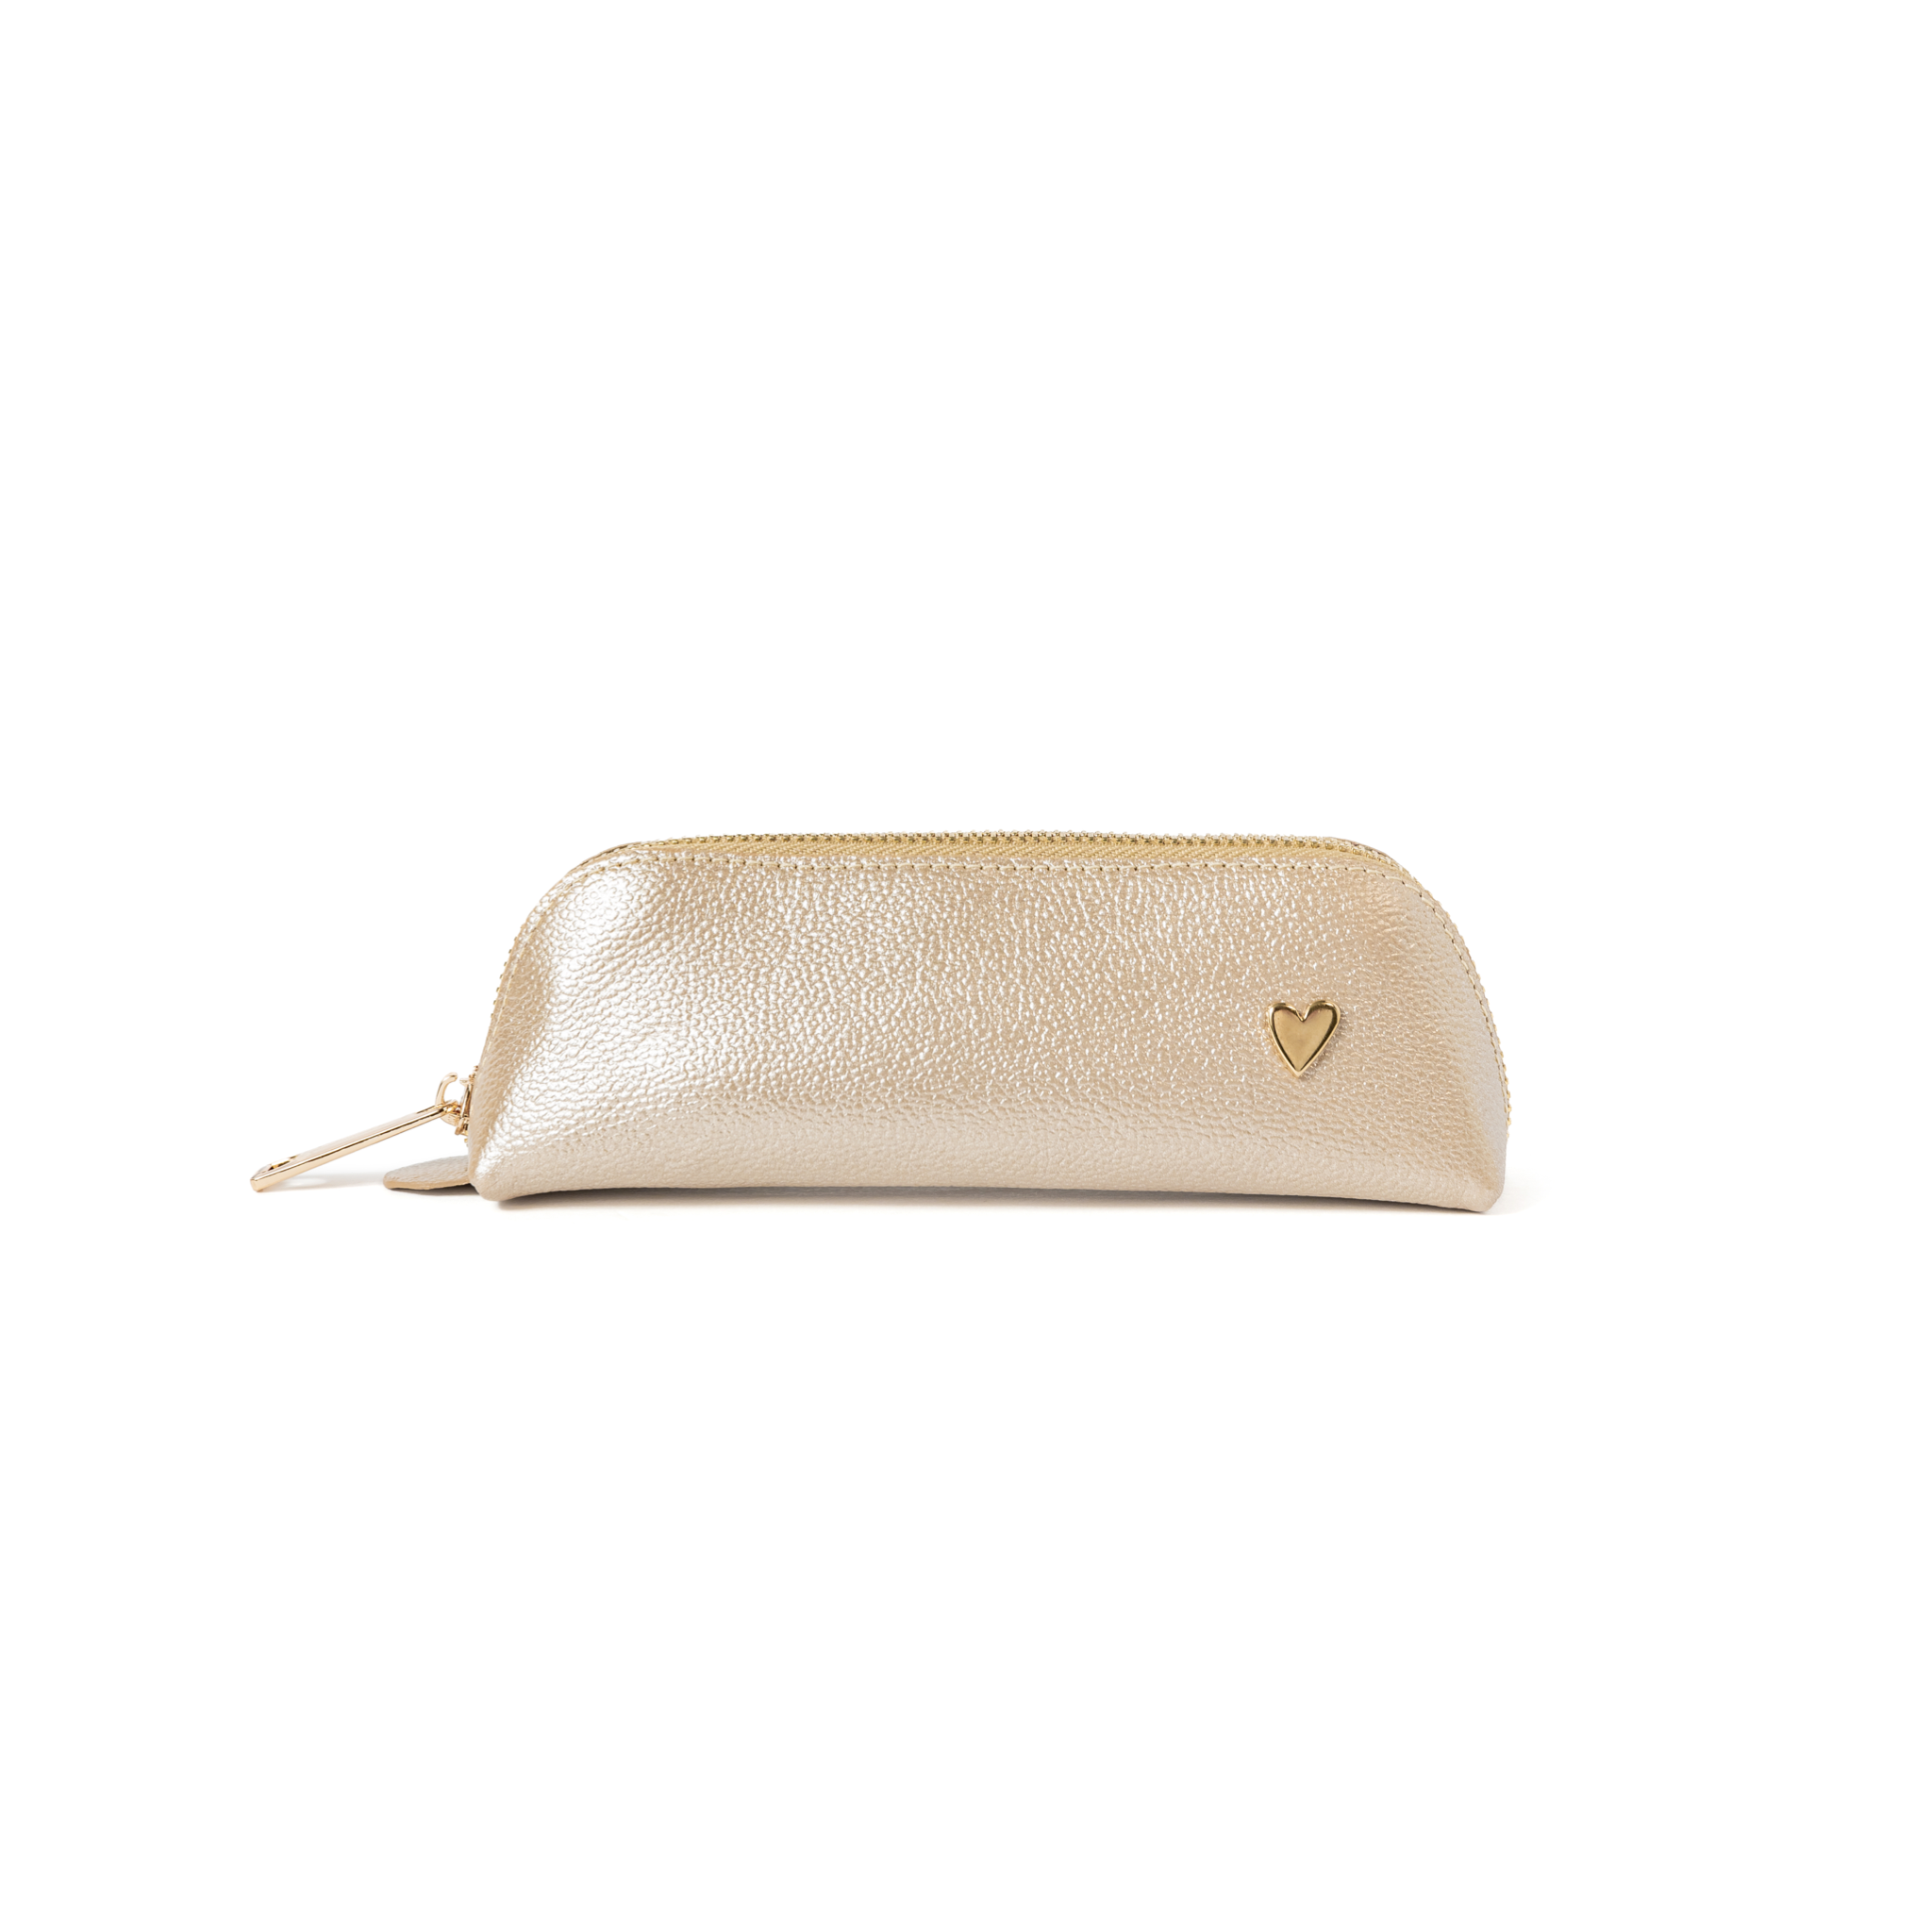 Pencil Case - Gold by Nataly Mendez, El portalapices no incluye los marcadores mostrados en la imagen. Genuine Leather Signature Heart Fits about 15 pencils or pens Designed to stand in their own 2" H, 6.5" W, 2" D